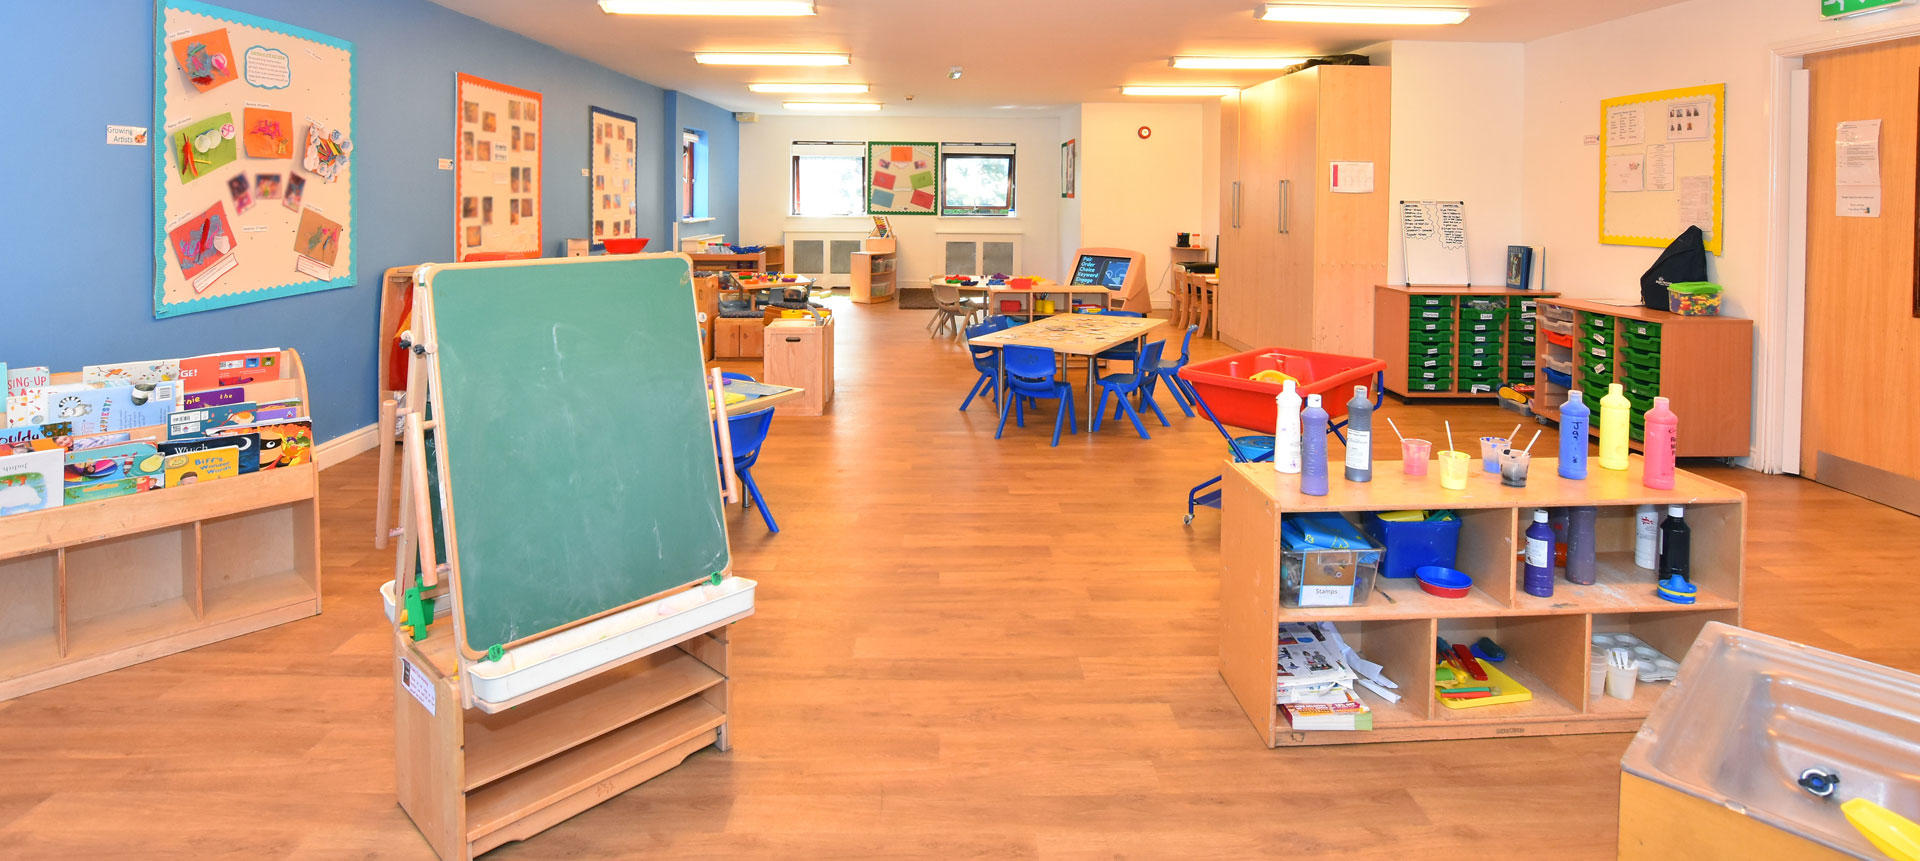 Bright Horizons Tooting Looking Glass Day Nursery and Preschool Tooting Bec 03339 203081